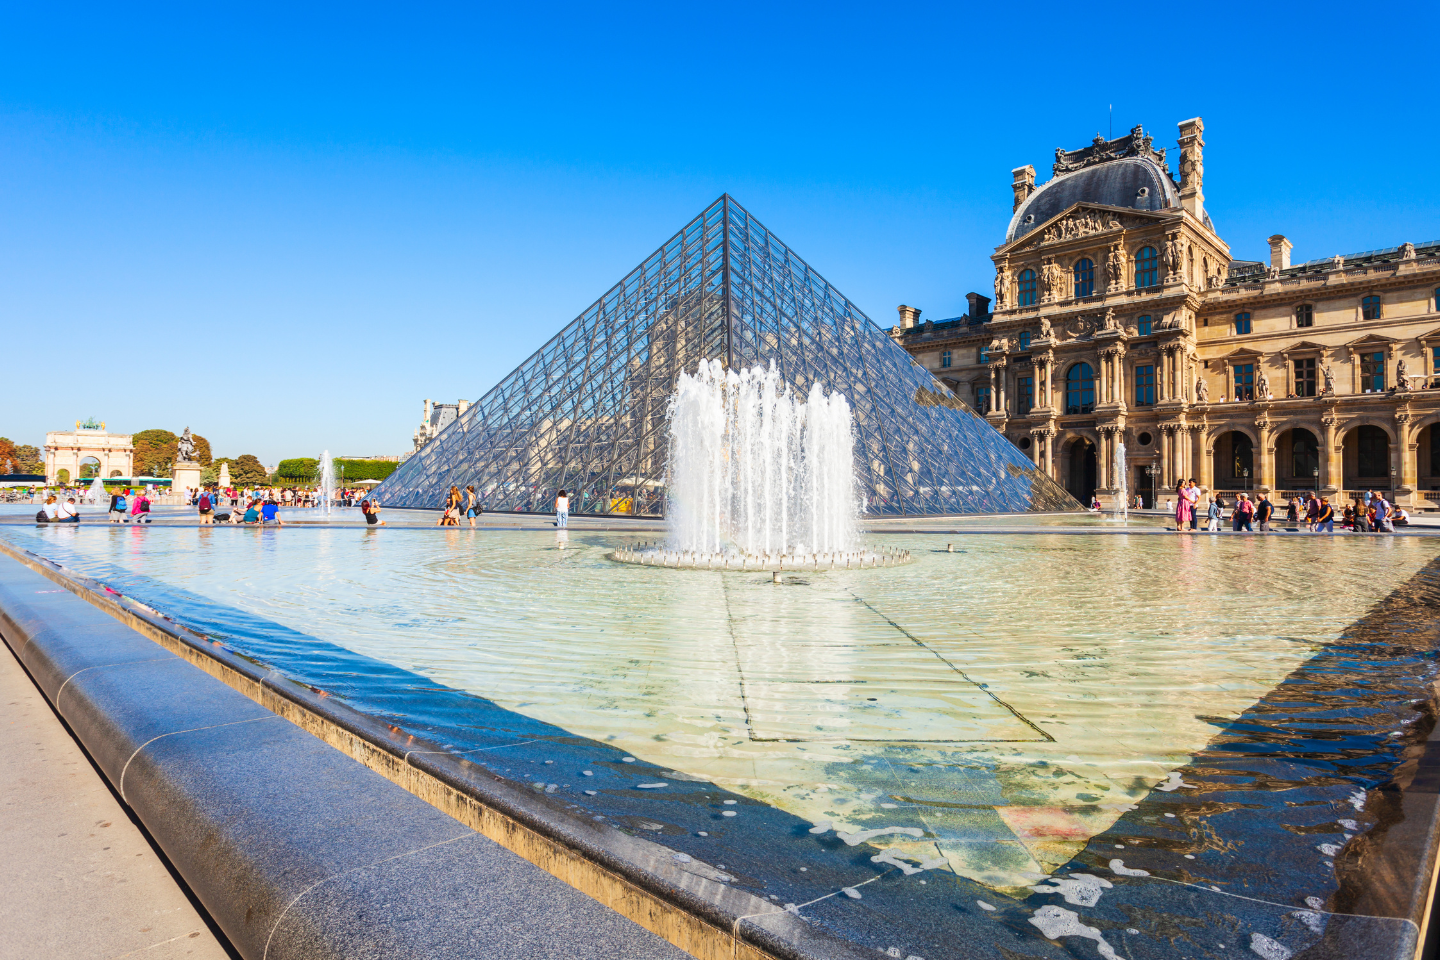 From Mona Lisa to Egyptian Antiquities: The Louvre's Diverse Collection